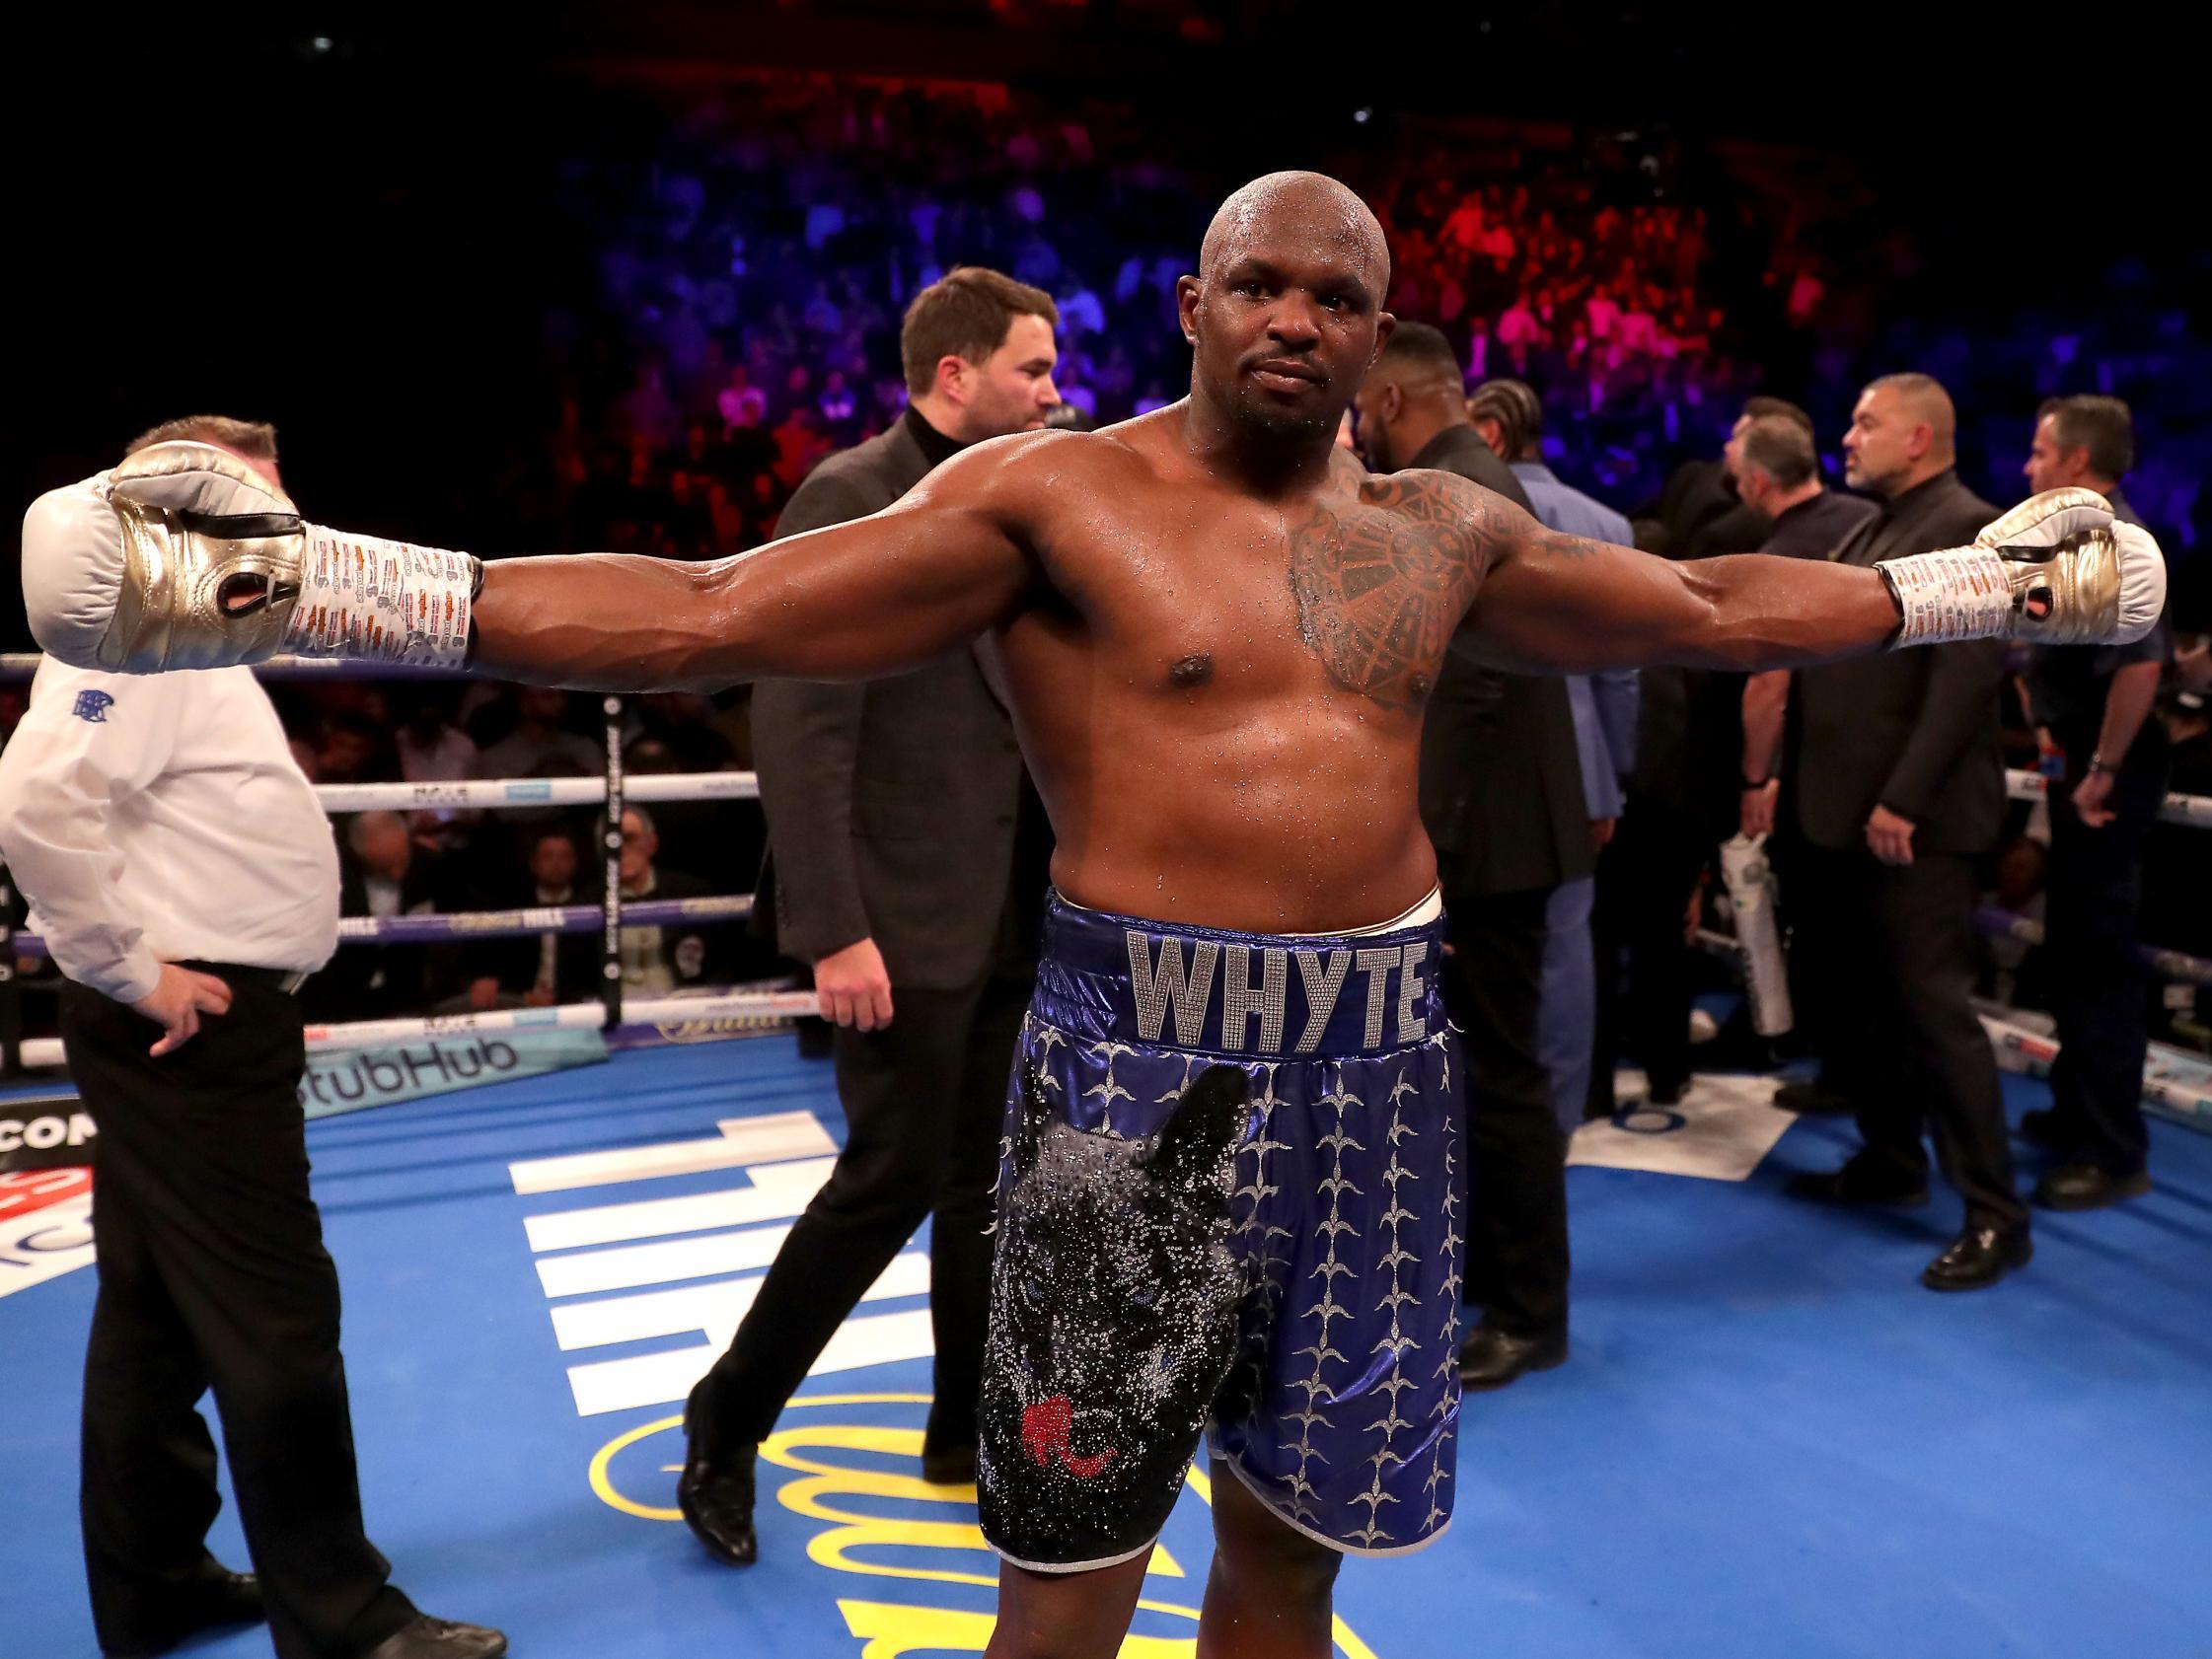 Dillian Whyte believes he deserves more respect from Anthony Joshua after receiving an offer for a rematch